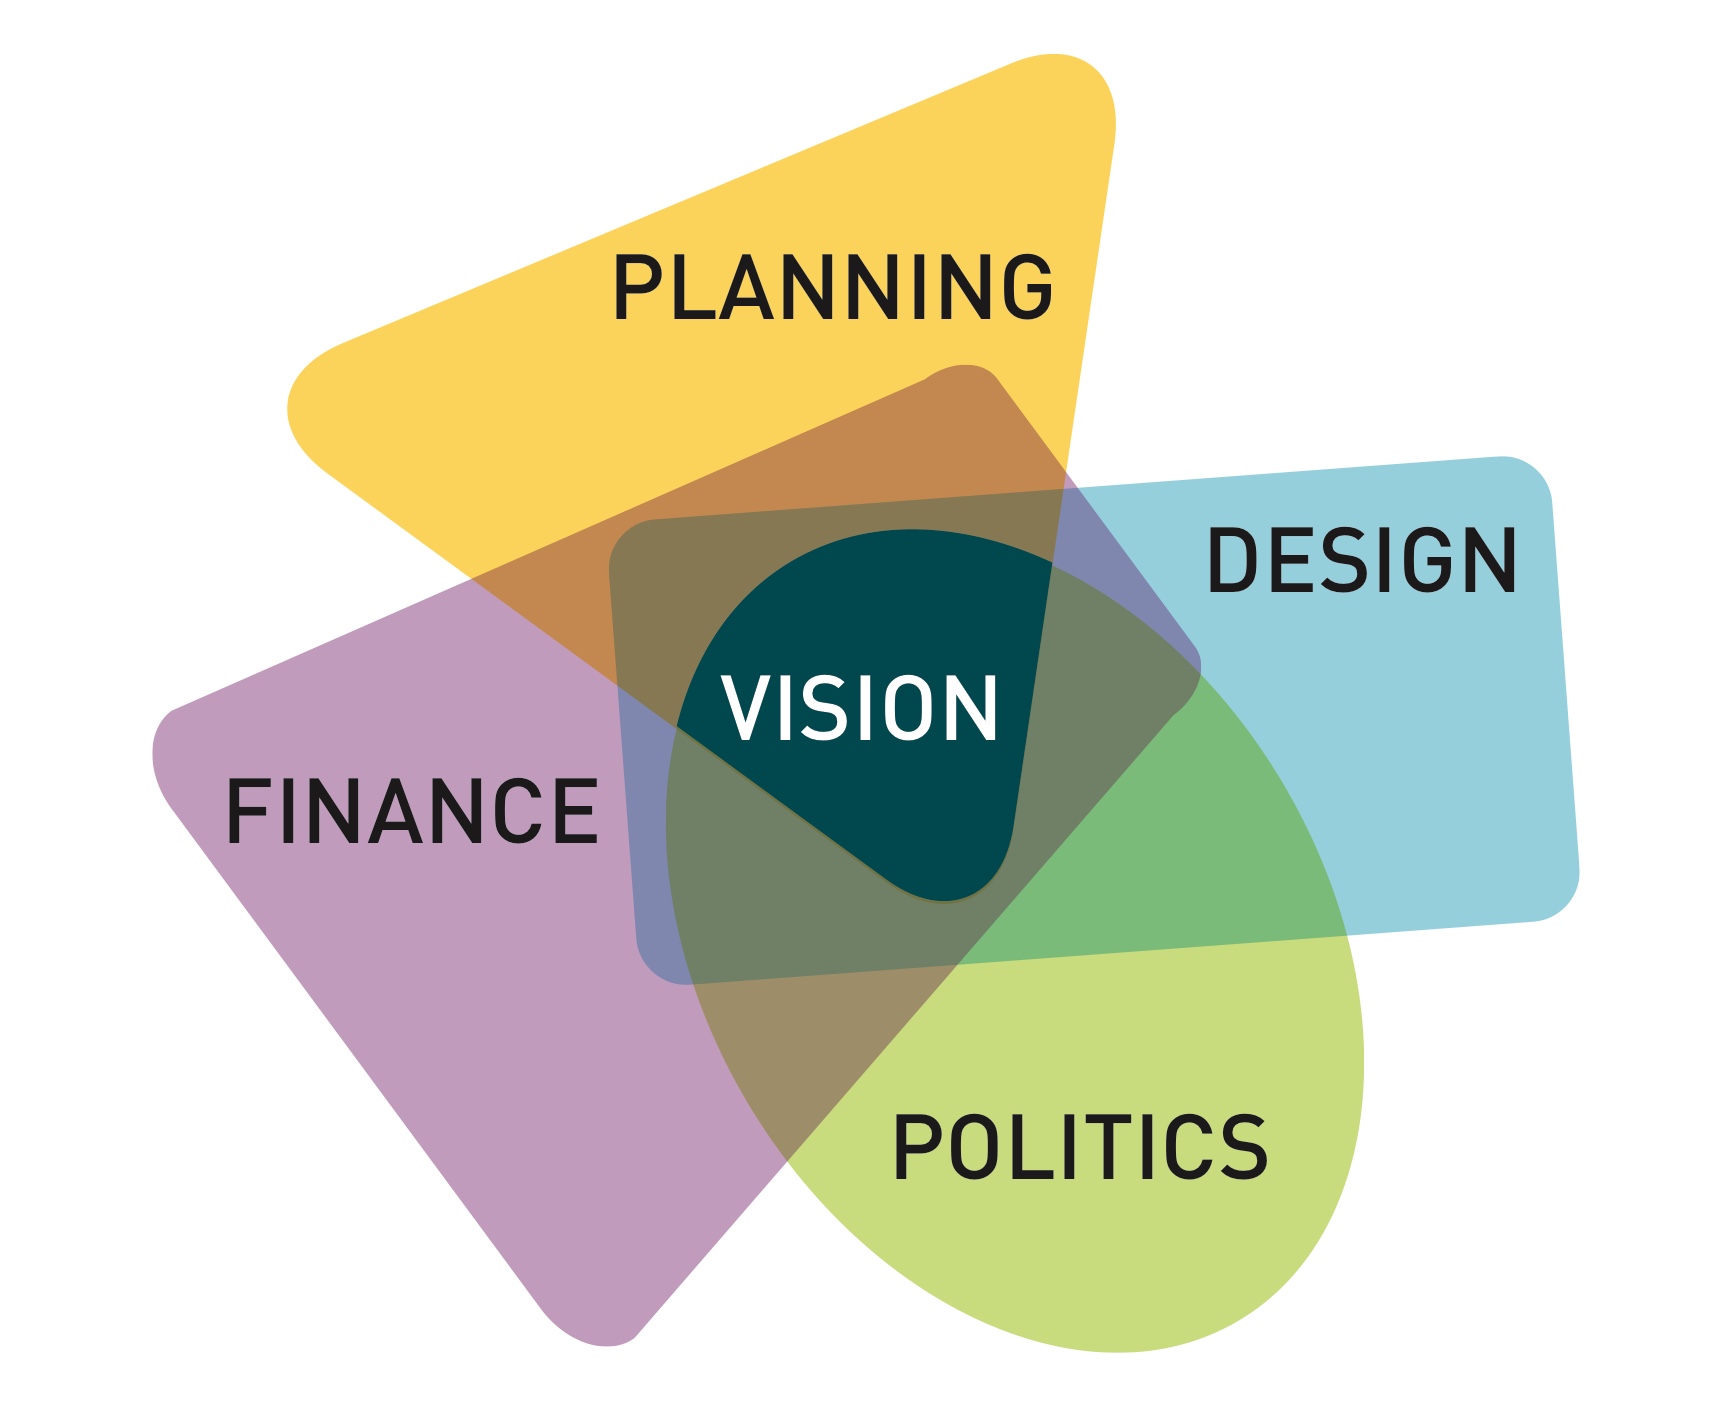 Image of overlapping geometric shapes with the words Planning + Design + Finance + Politics = Vision.